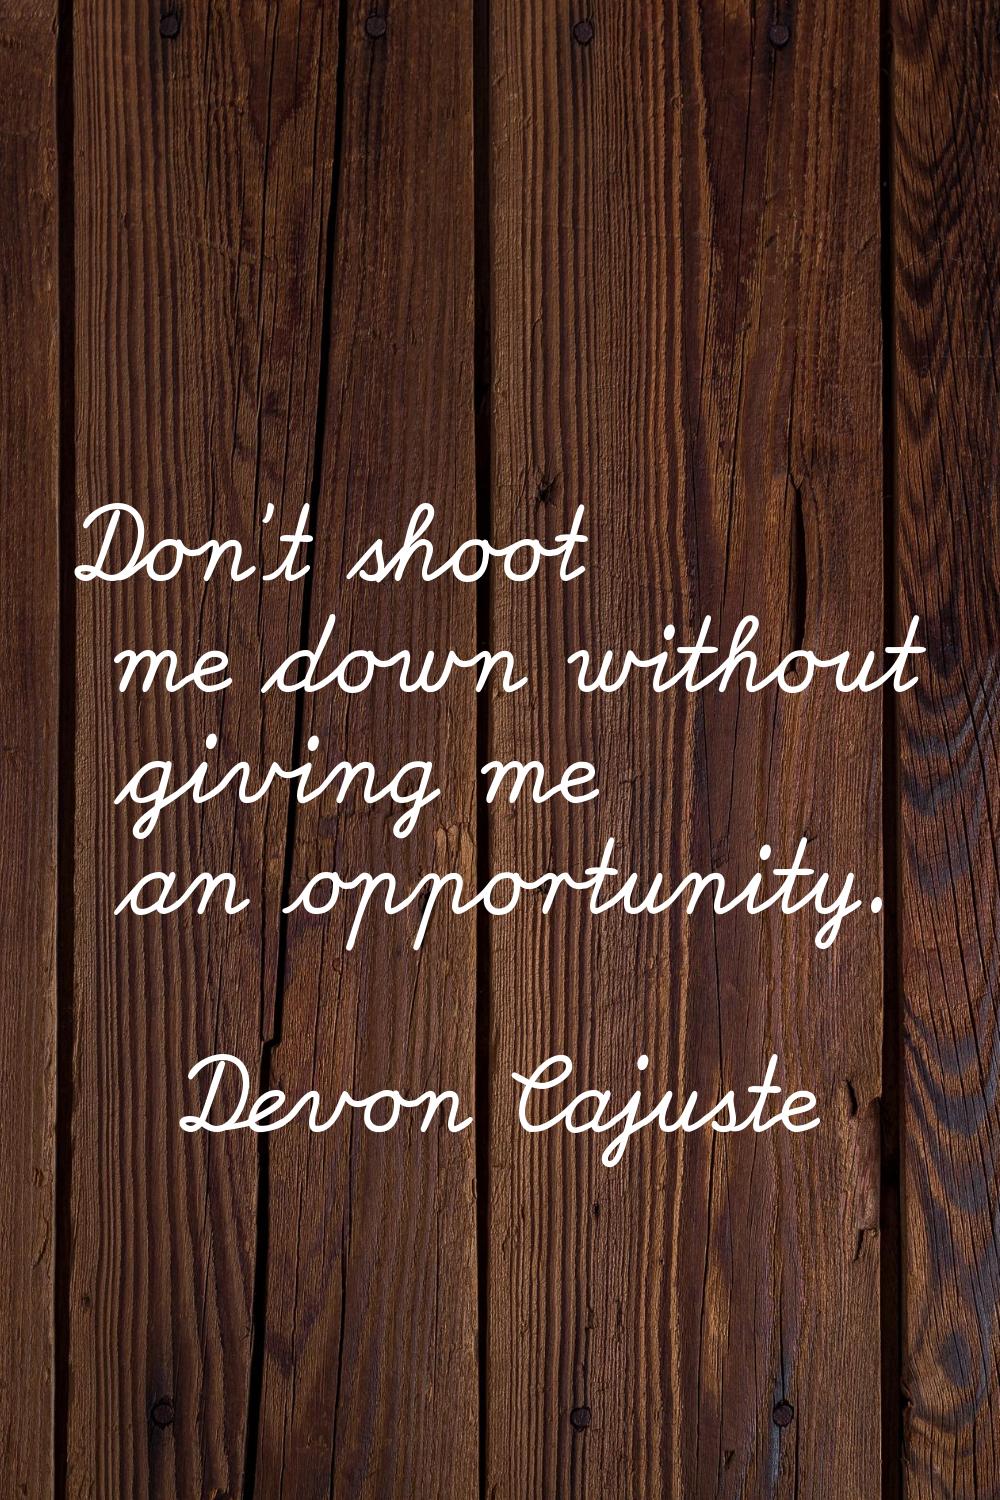 Don't shoot me down without giving me an opportunity.